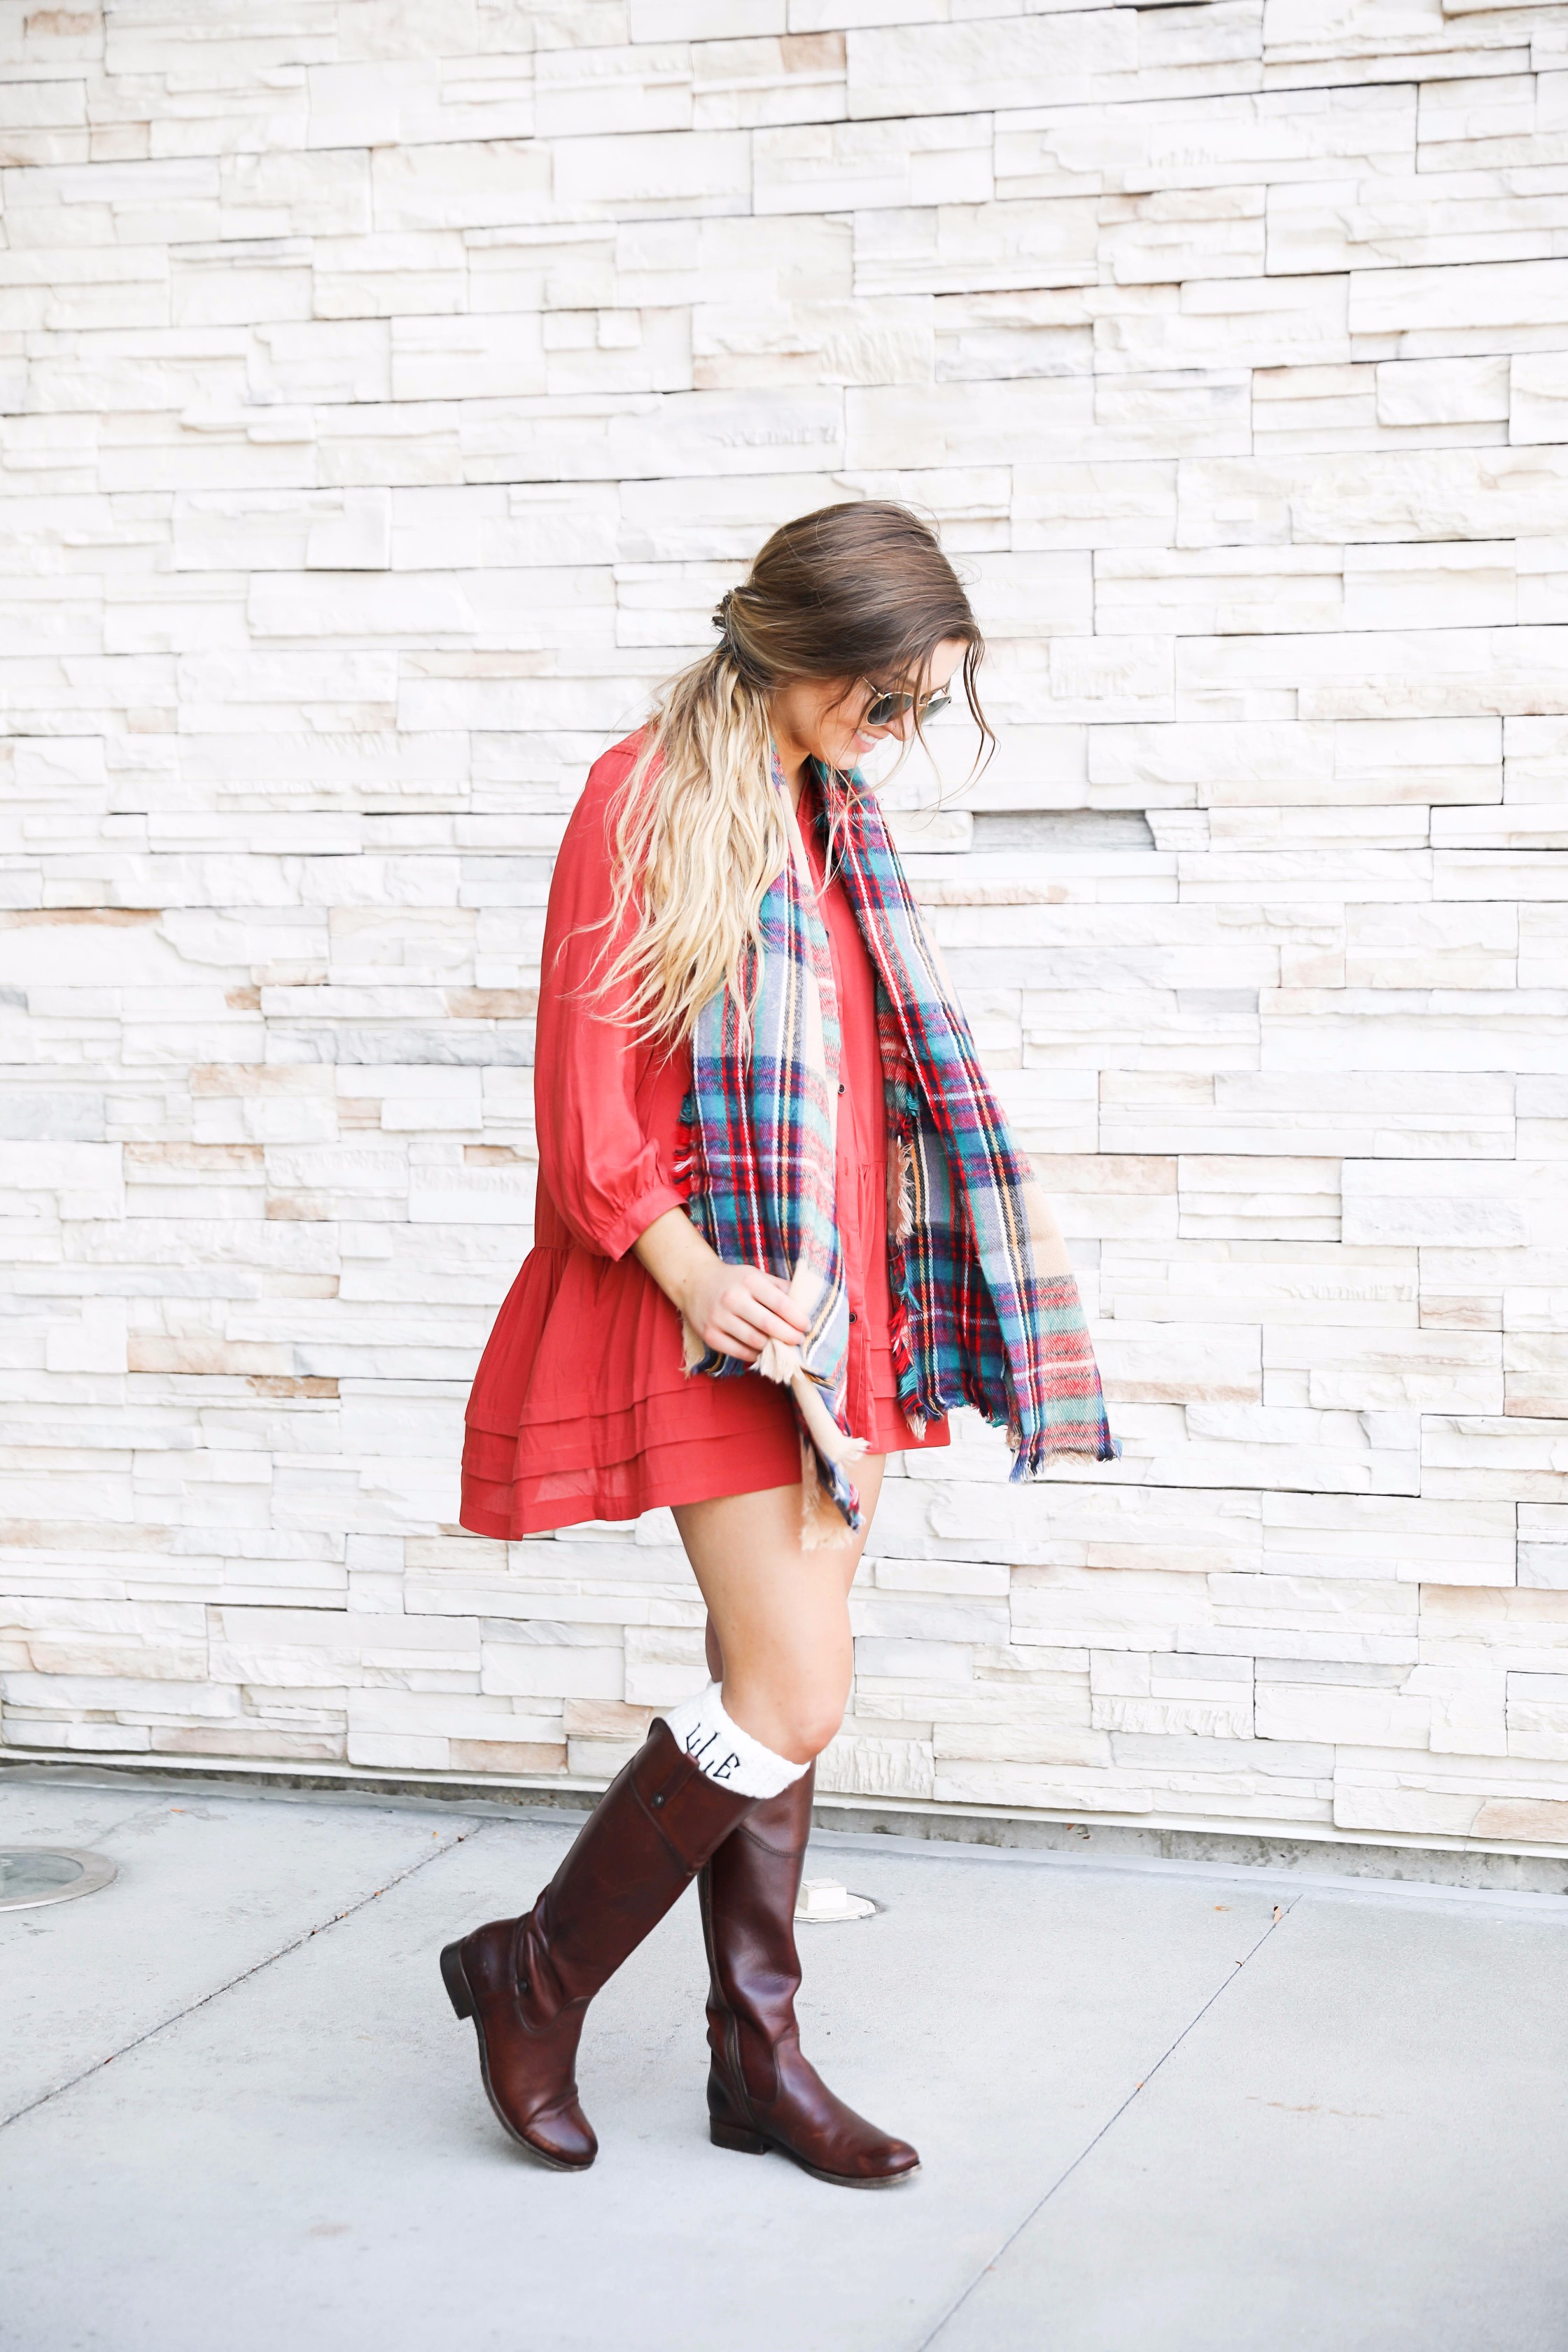 Coral button up dress for fall! I love a classic fall outfit like this, dresses with blanket scarves are so cute! I love the monogram boot socks to finish off the look with Frye boots! Find the details on fall fashion blog daily dose of charm bby lauren lindmark